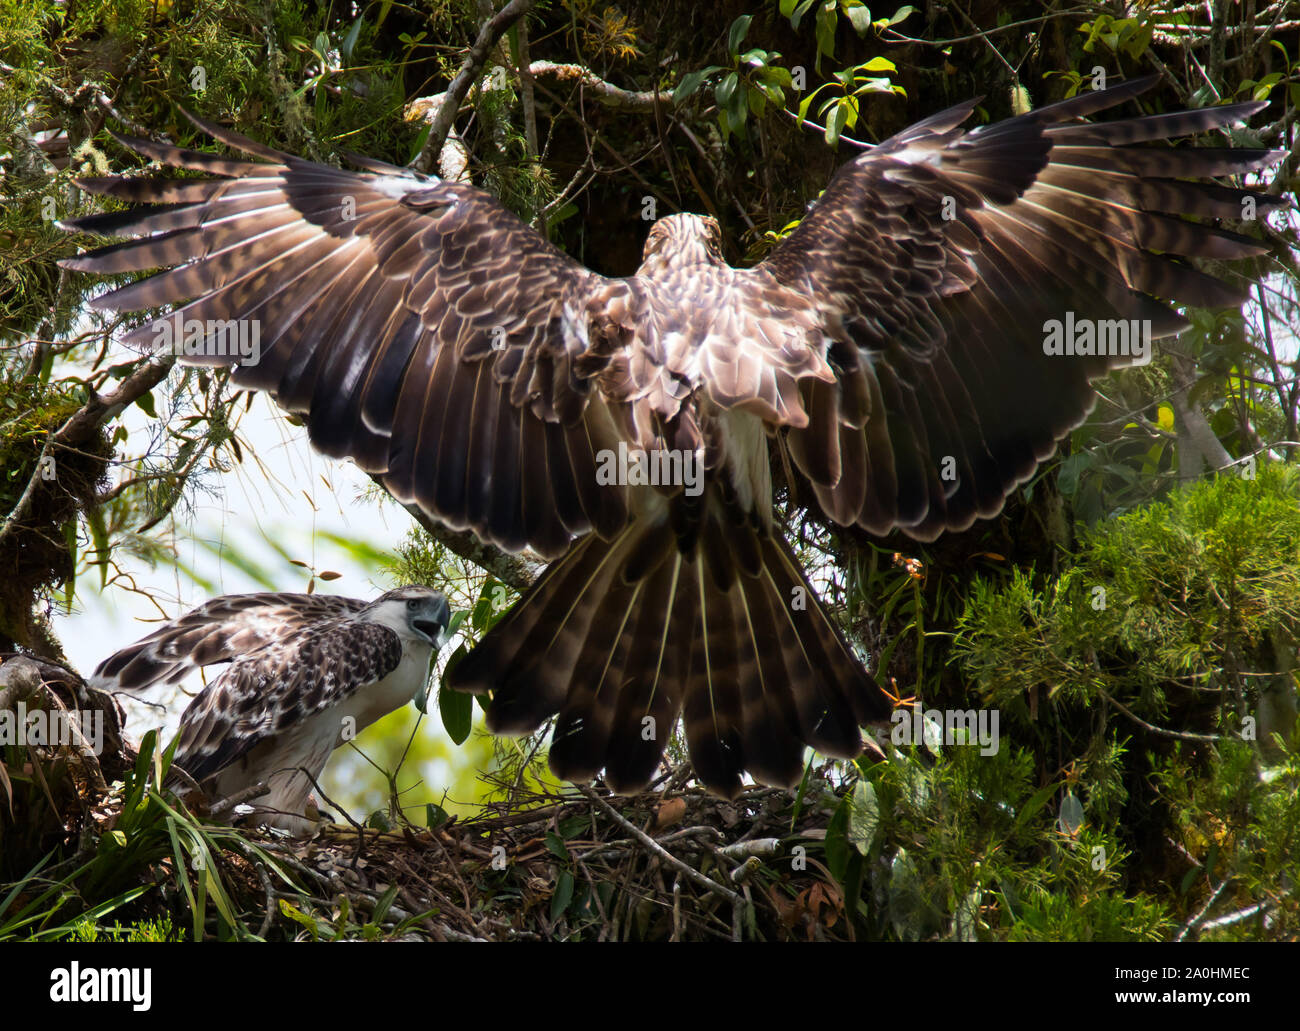 An adult Philippine Eagle with open wingspan descends to its nest with prey for the juvenile fledgeling awaiting food.Philippine Eagles are amongst the rarest Eagles.Endemic to the Philippines it is regarded as critically endangered by the IUCN Red List of Threatened Species.Loss of habitat due to deforestation is considered as a major factor in the decline of the species. Stock Photo